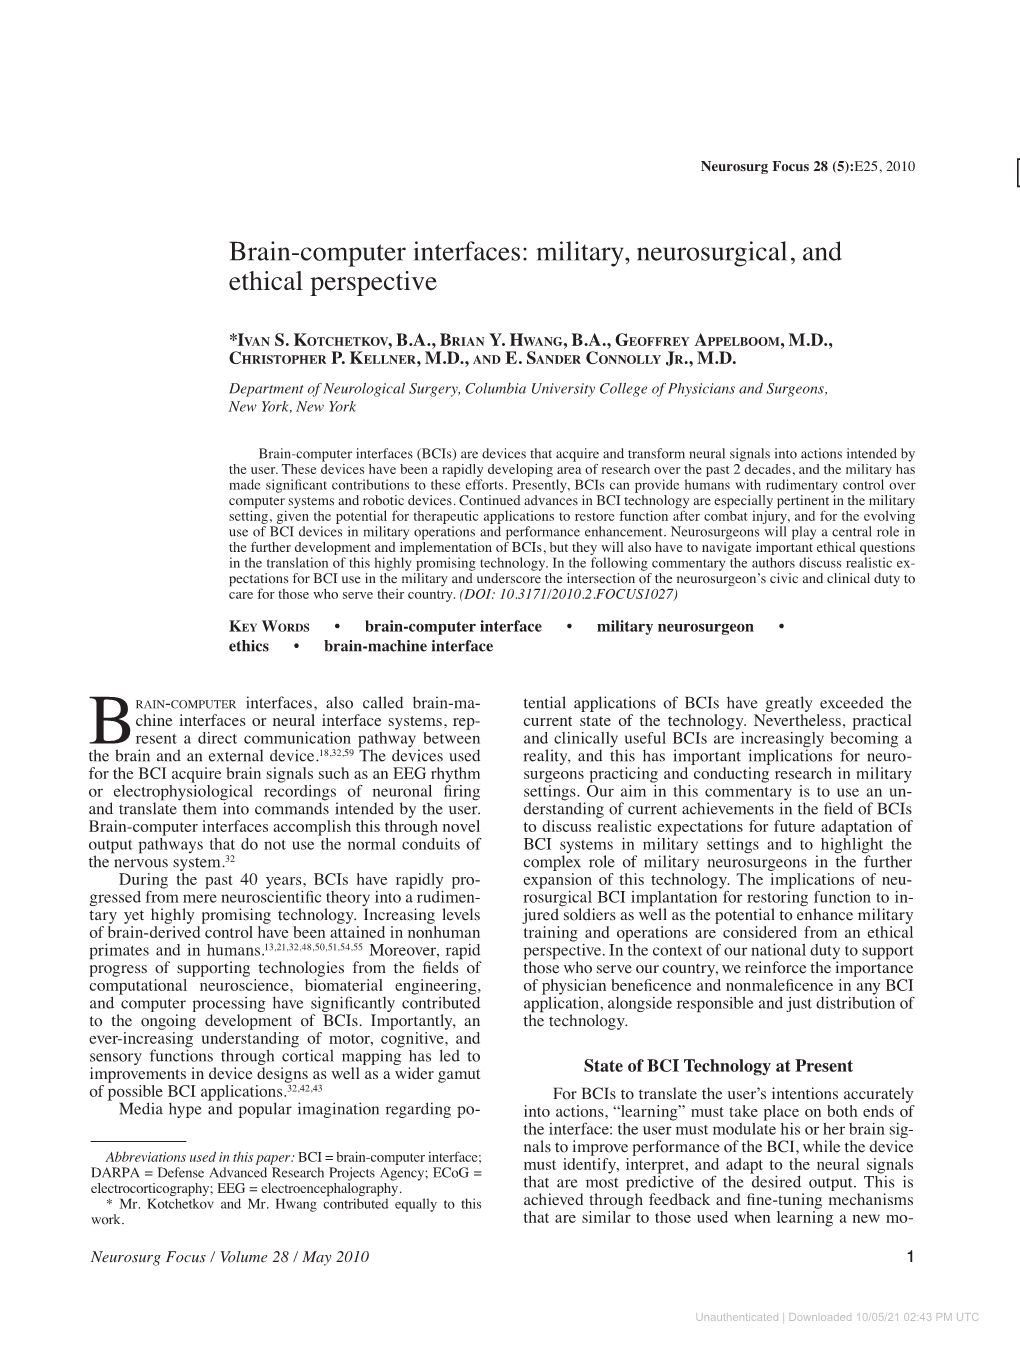 Brain-Computer Interfaces: Military, Neurosurgical, and Ethical Perspective